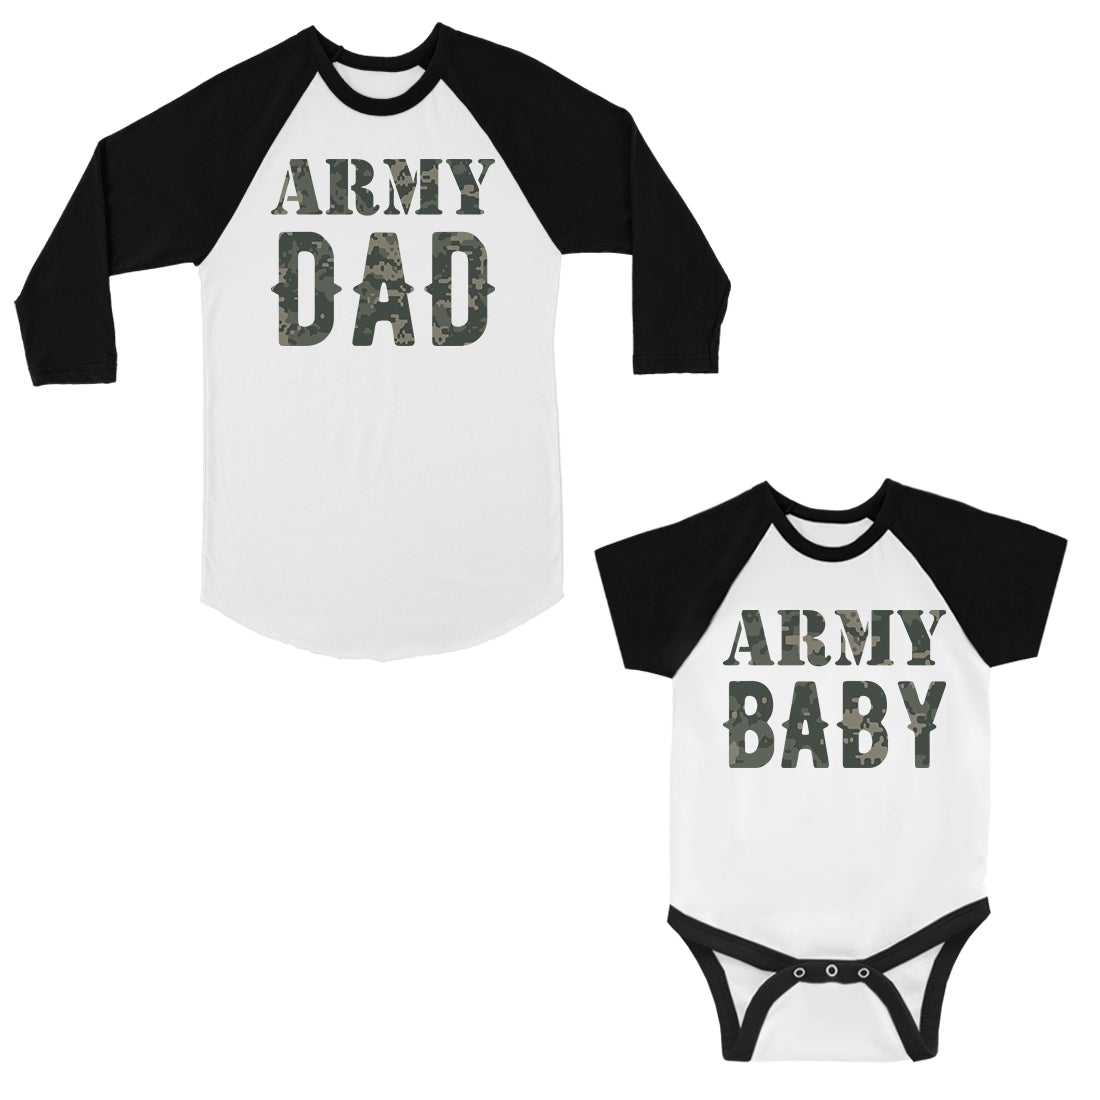 Army Dad Army Baby Dad Baby Matching Baseball Shirts Fun Father Day White